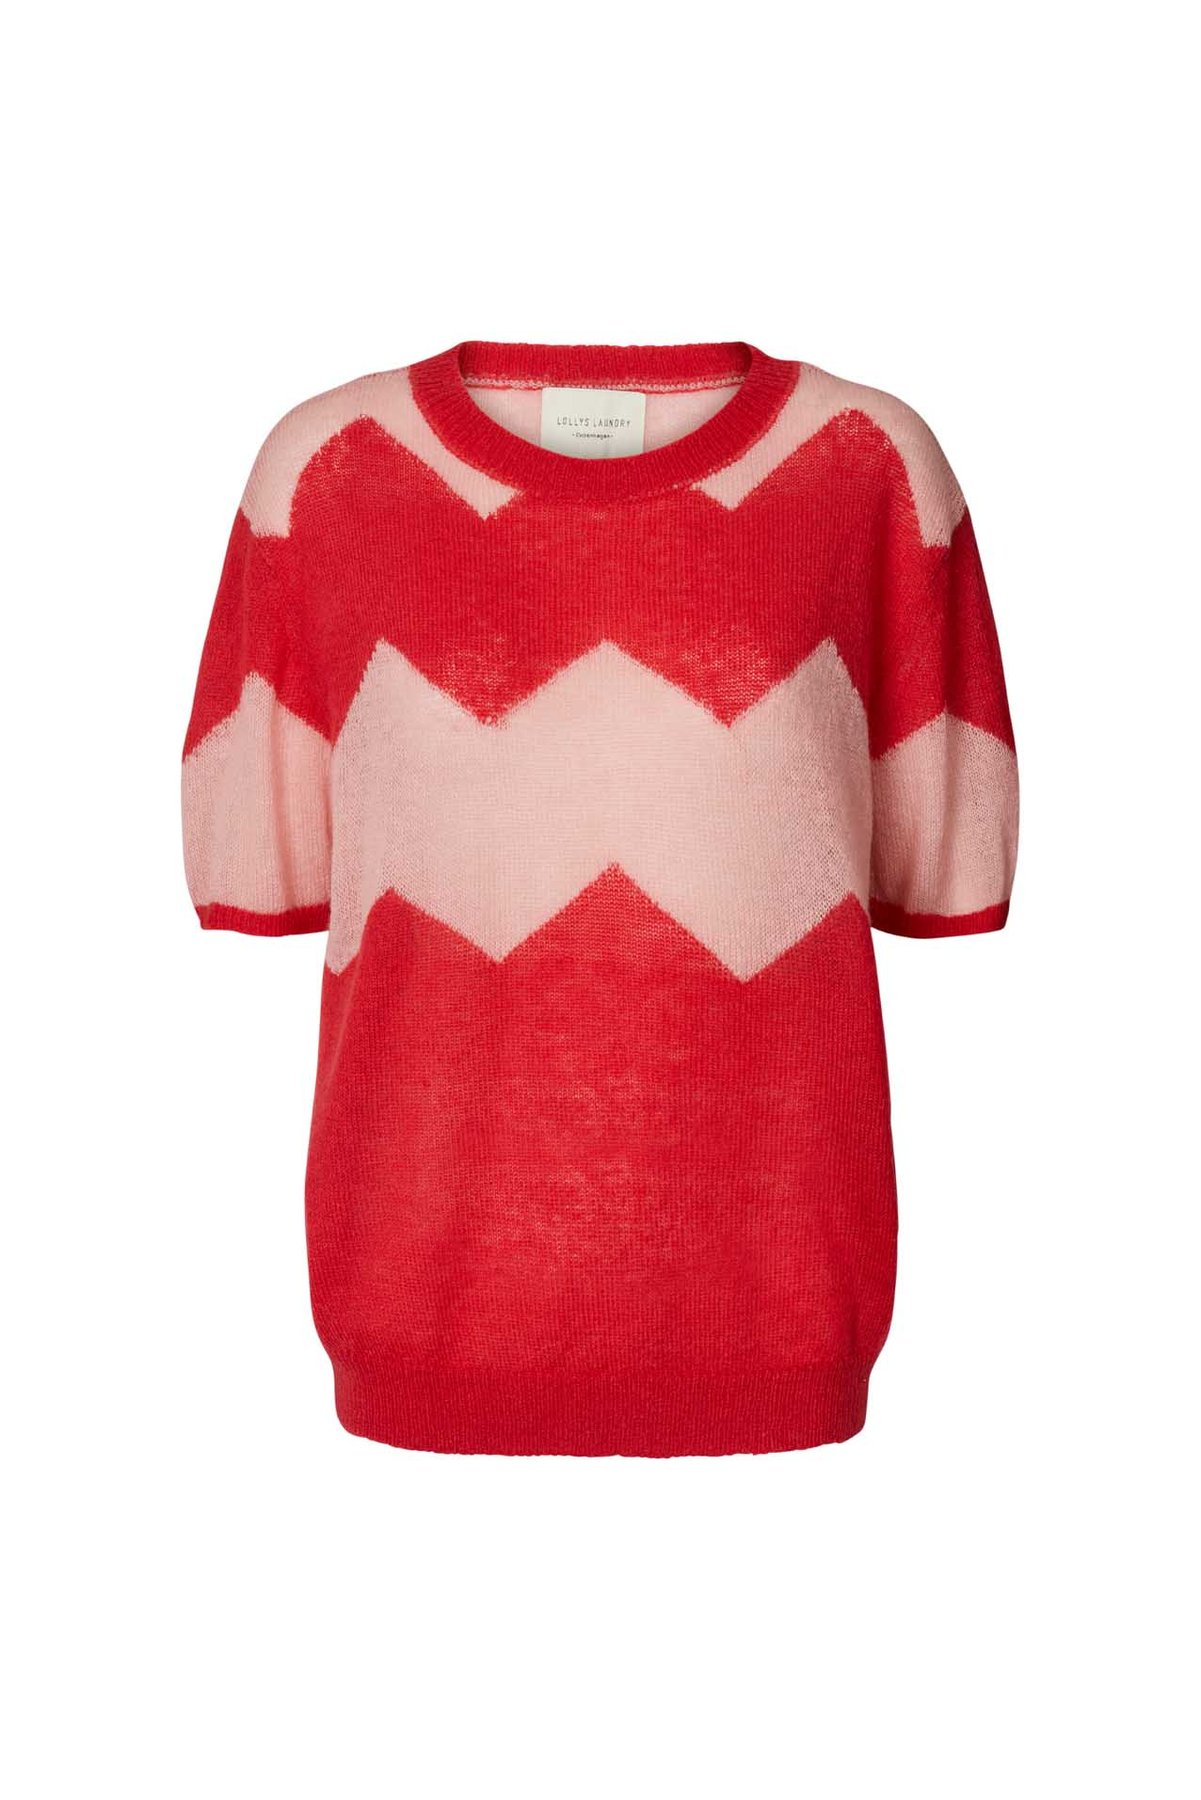 lollys-laundry-anton-jumper-in-pink-and-red-stripe